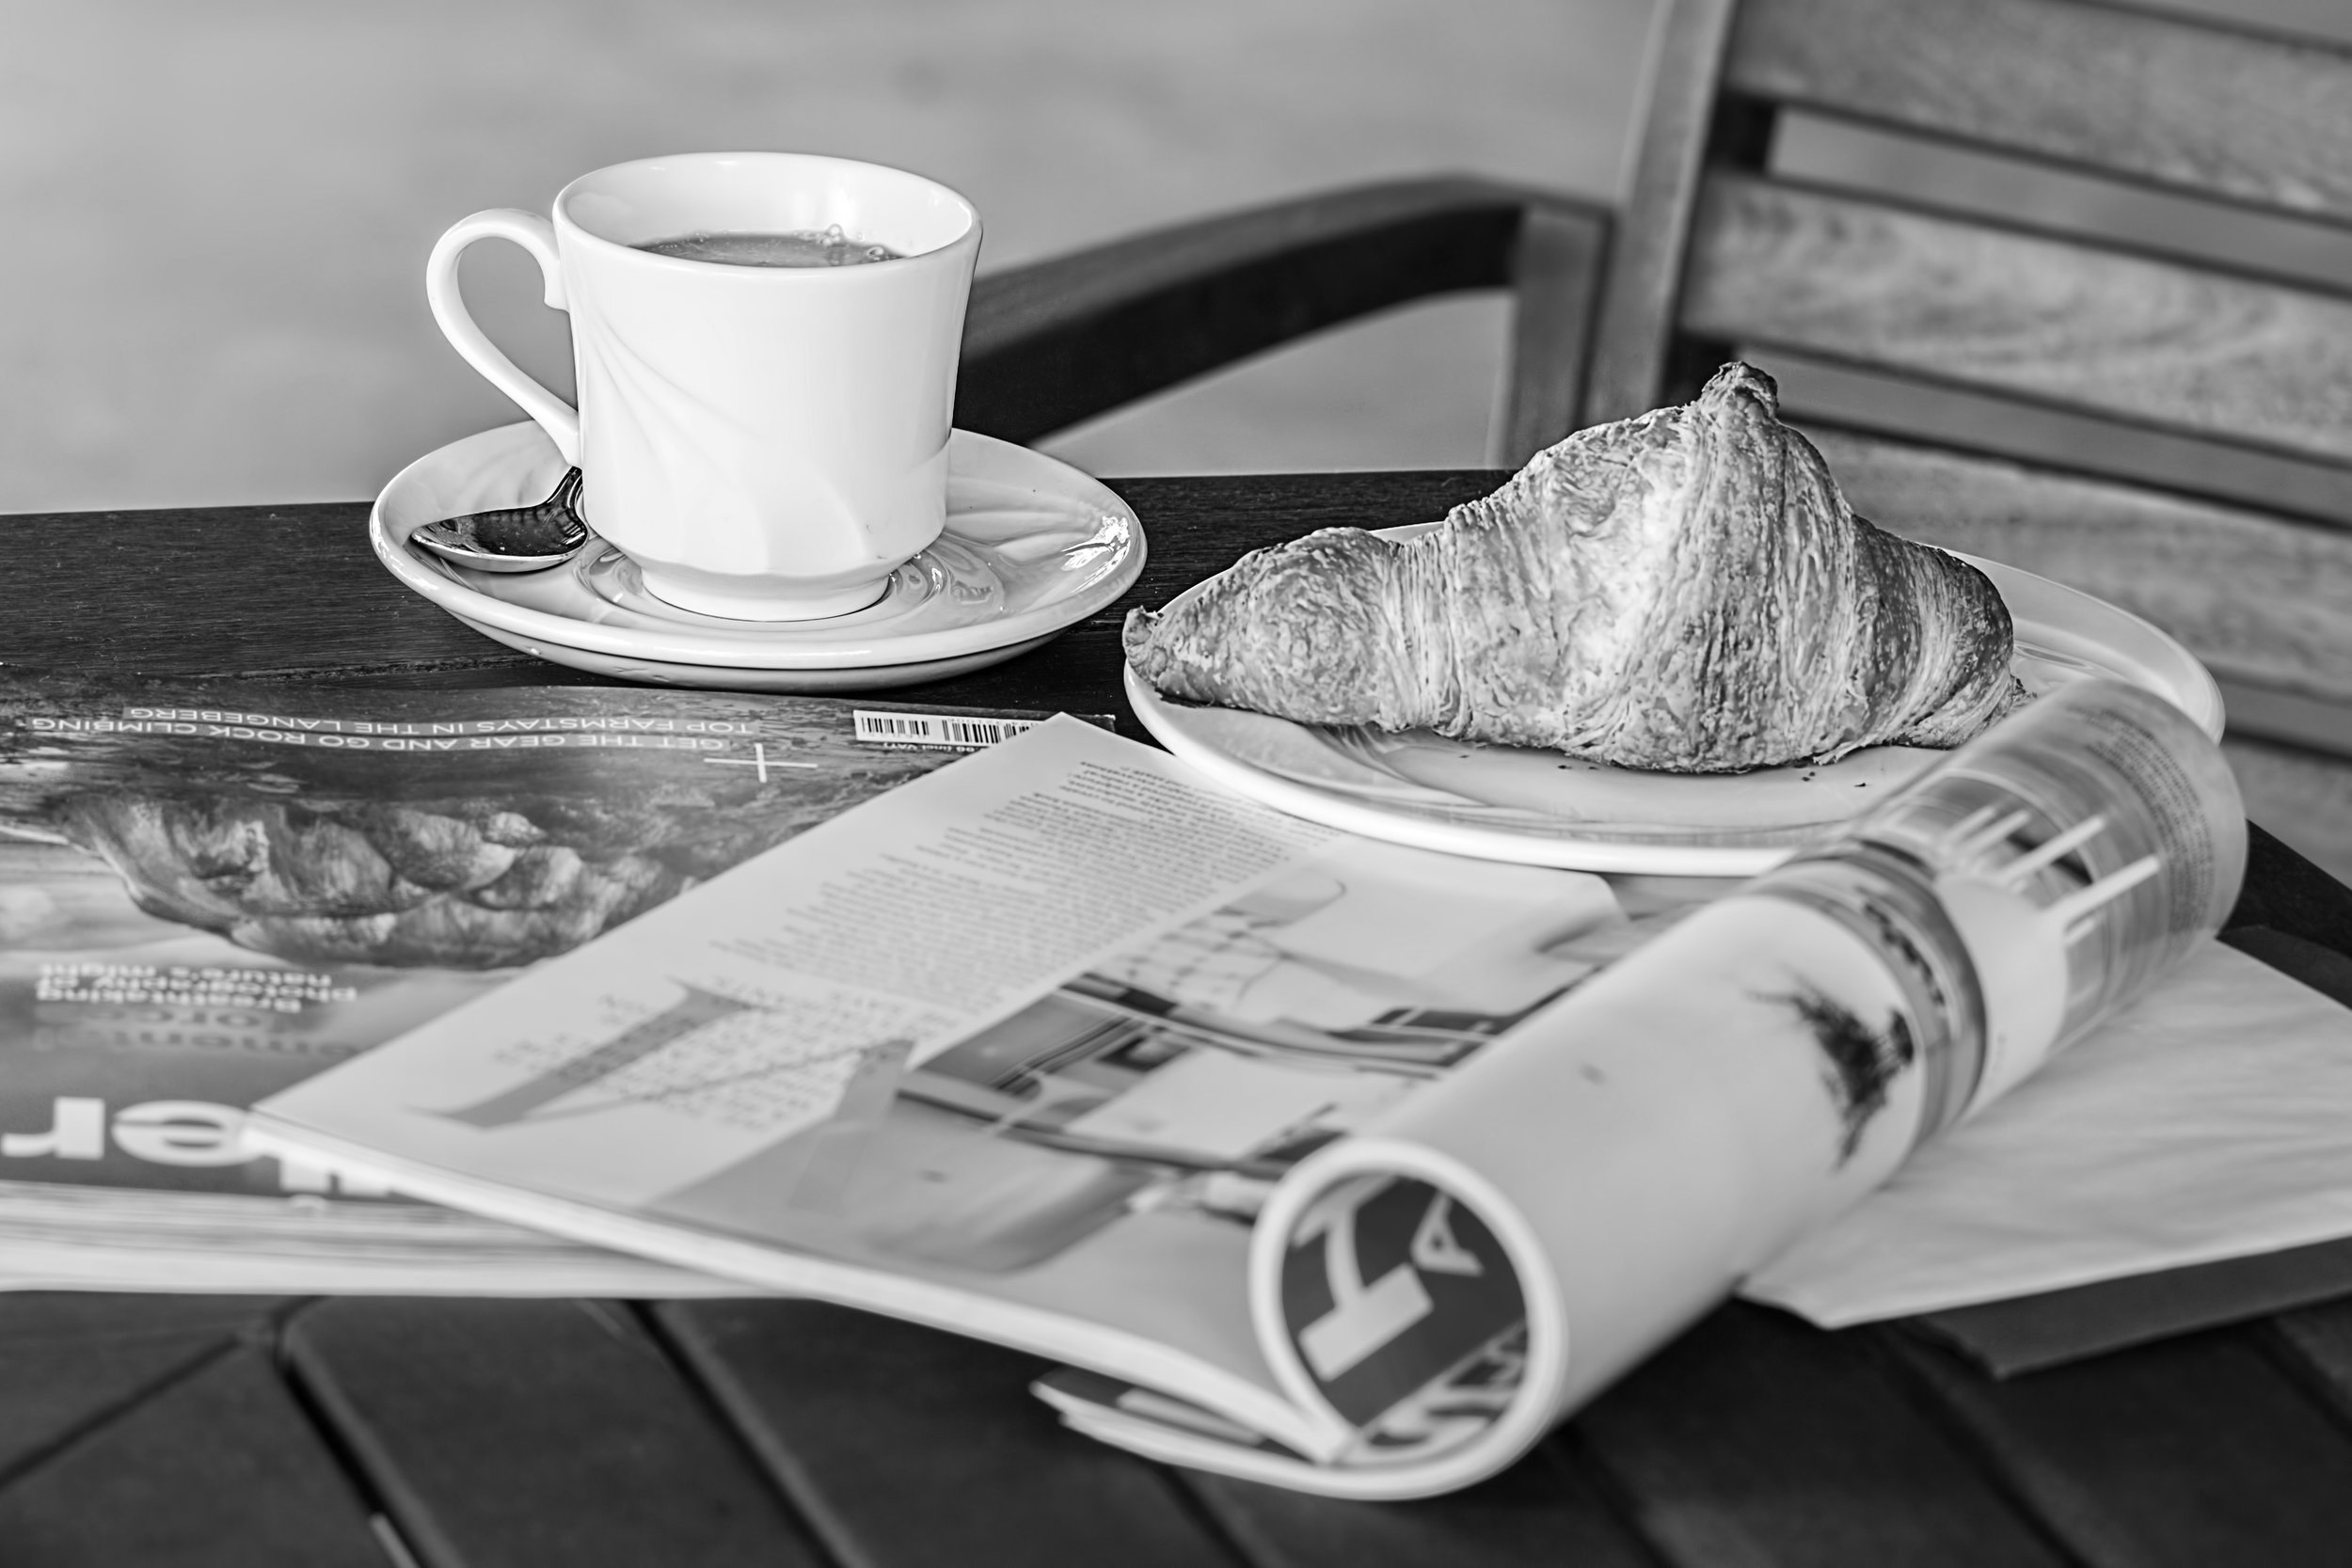 A coffee and a croissant on an open magazine atop a wooden table